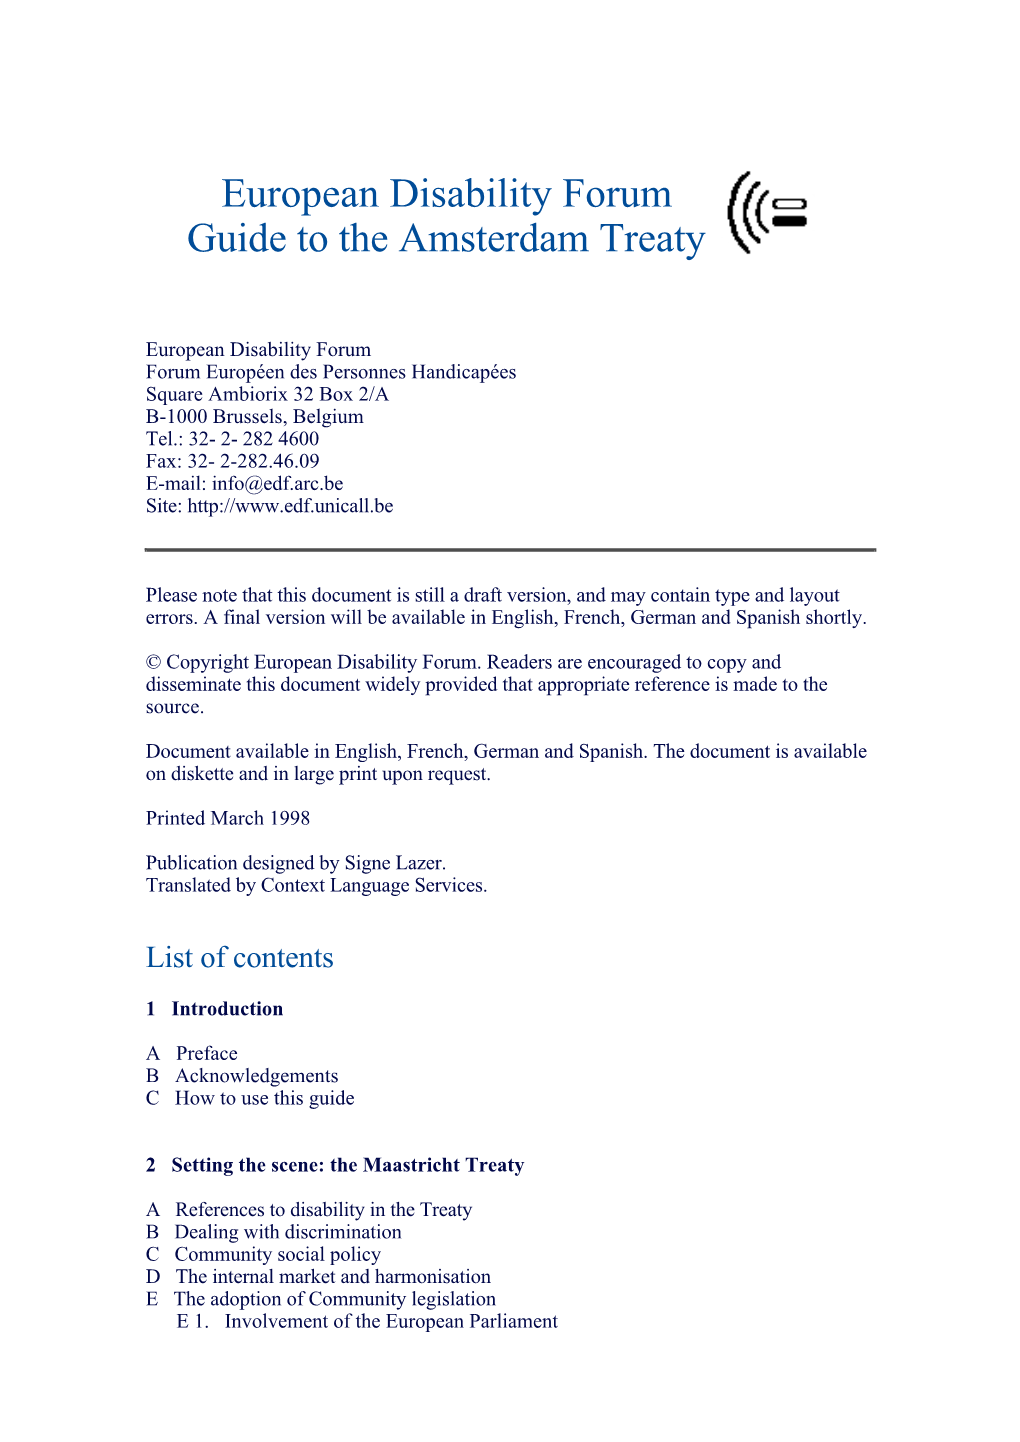 Guide to the Amsterdam Treaty